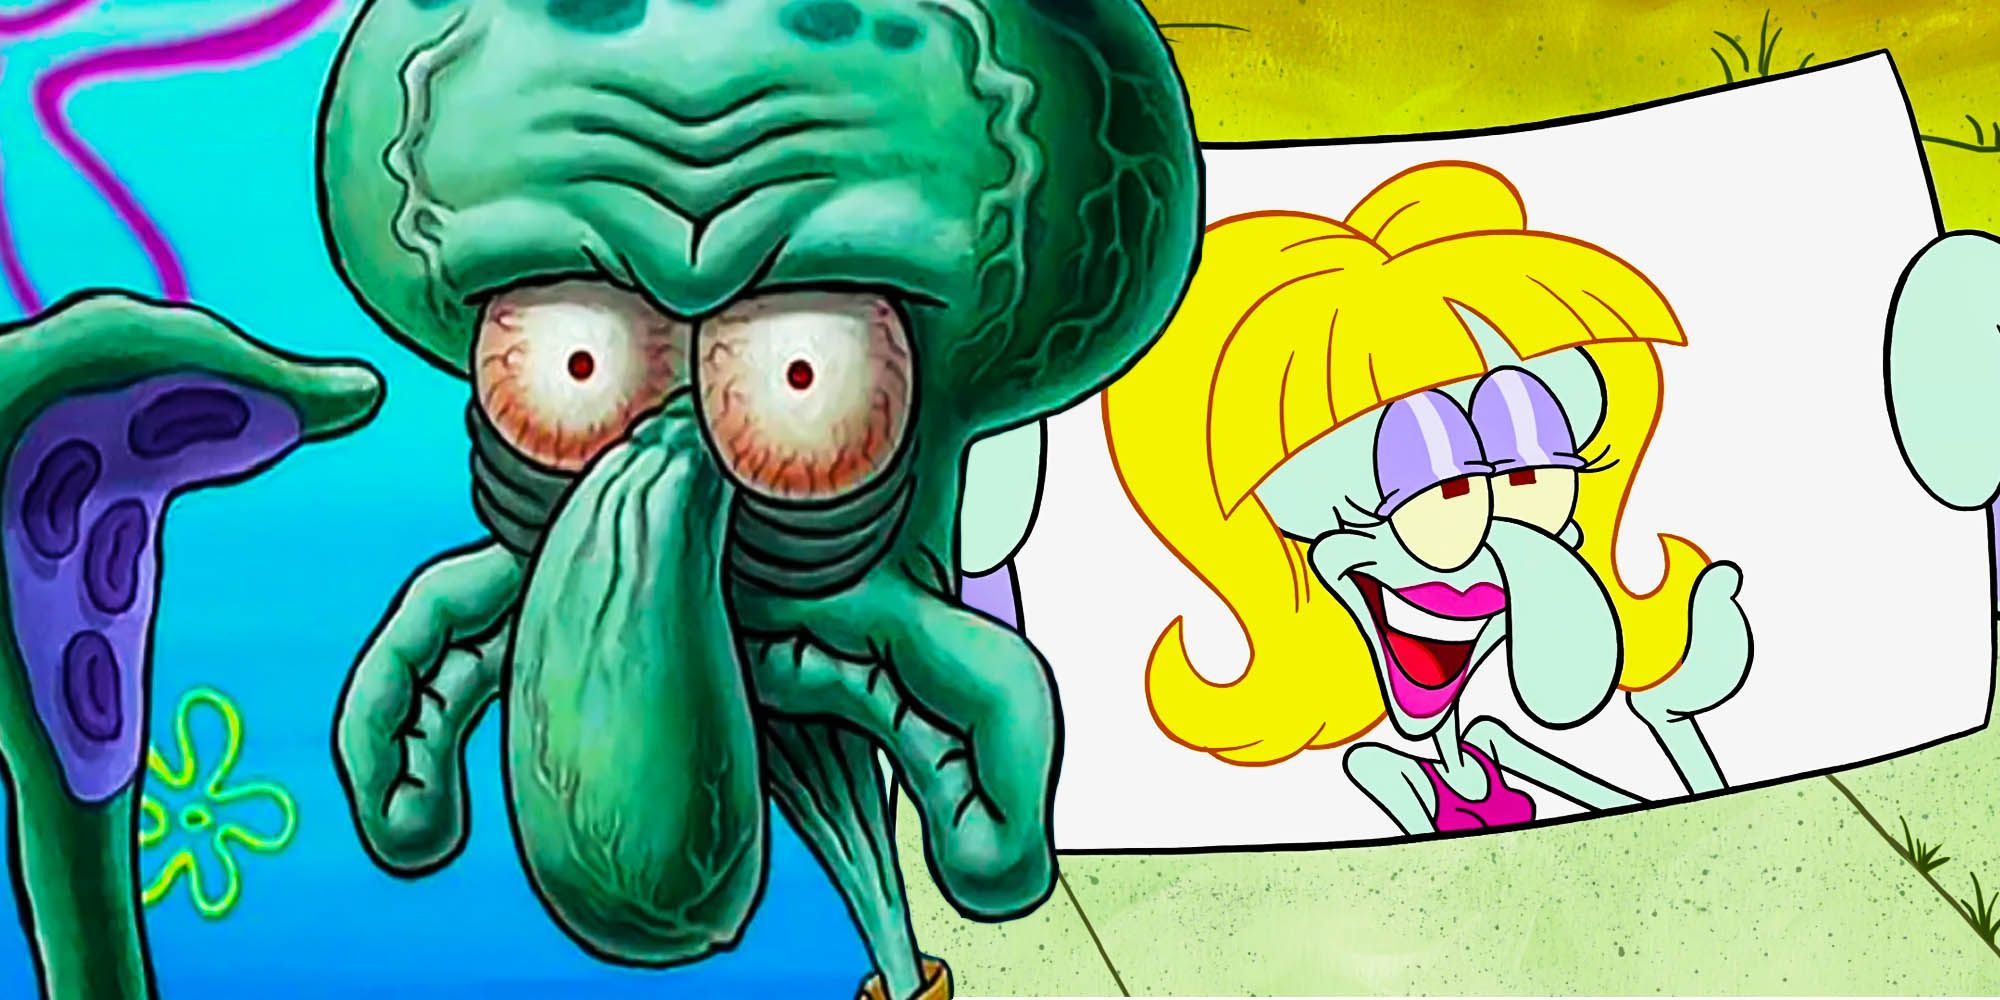 Spongebob Squidward have a wife theory